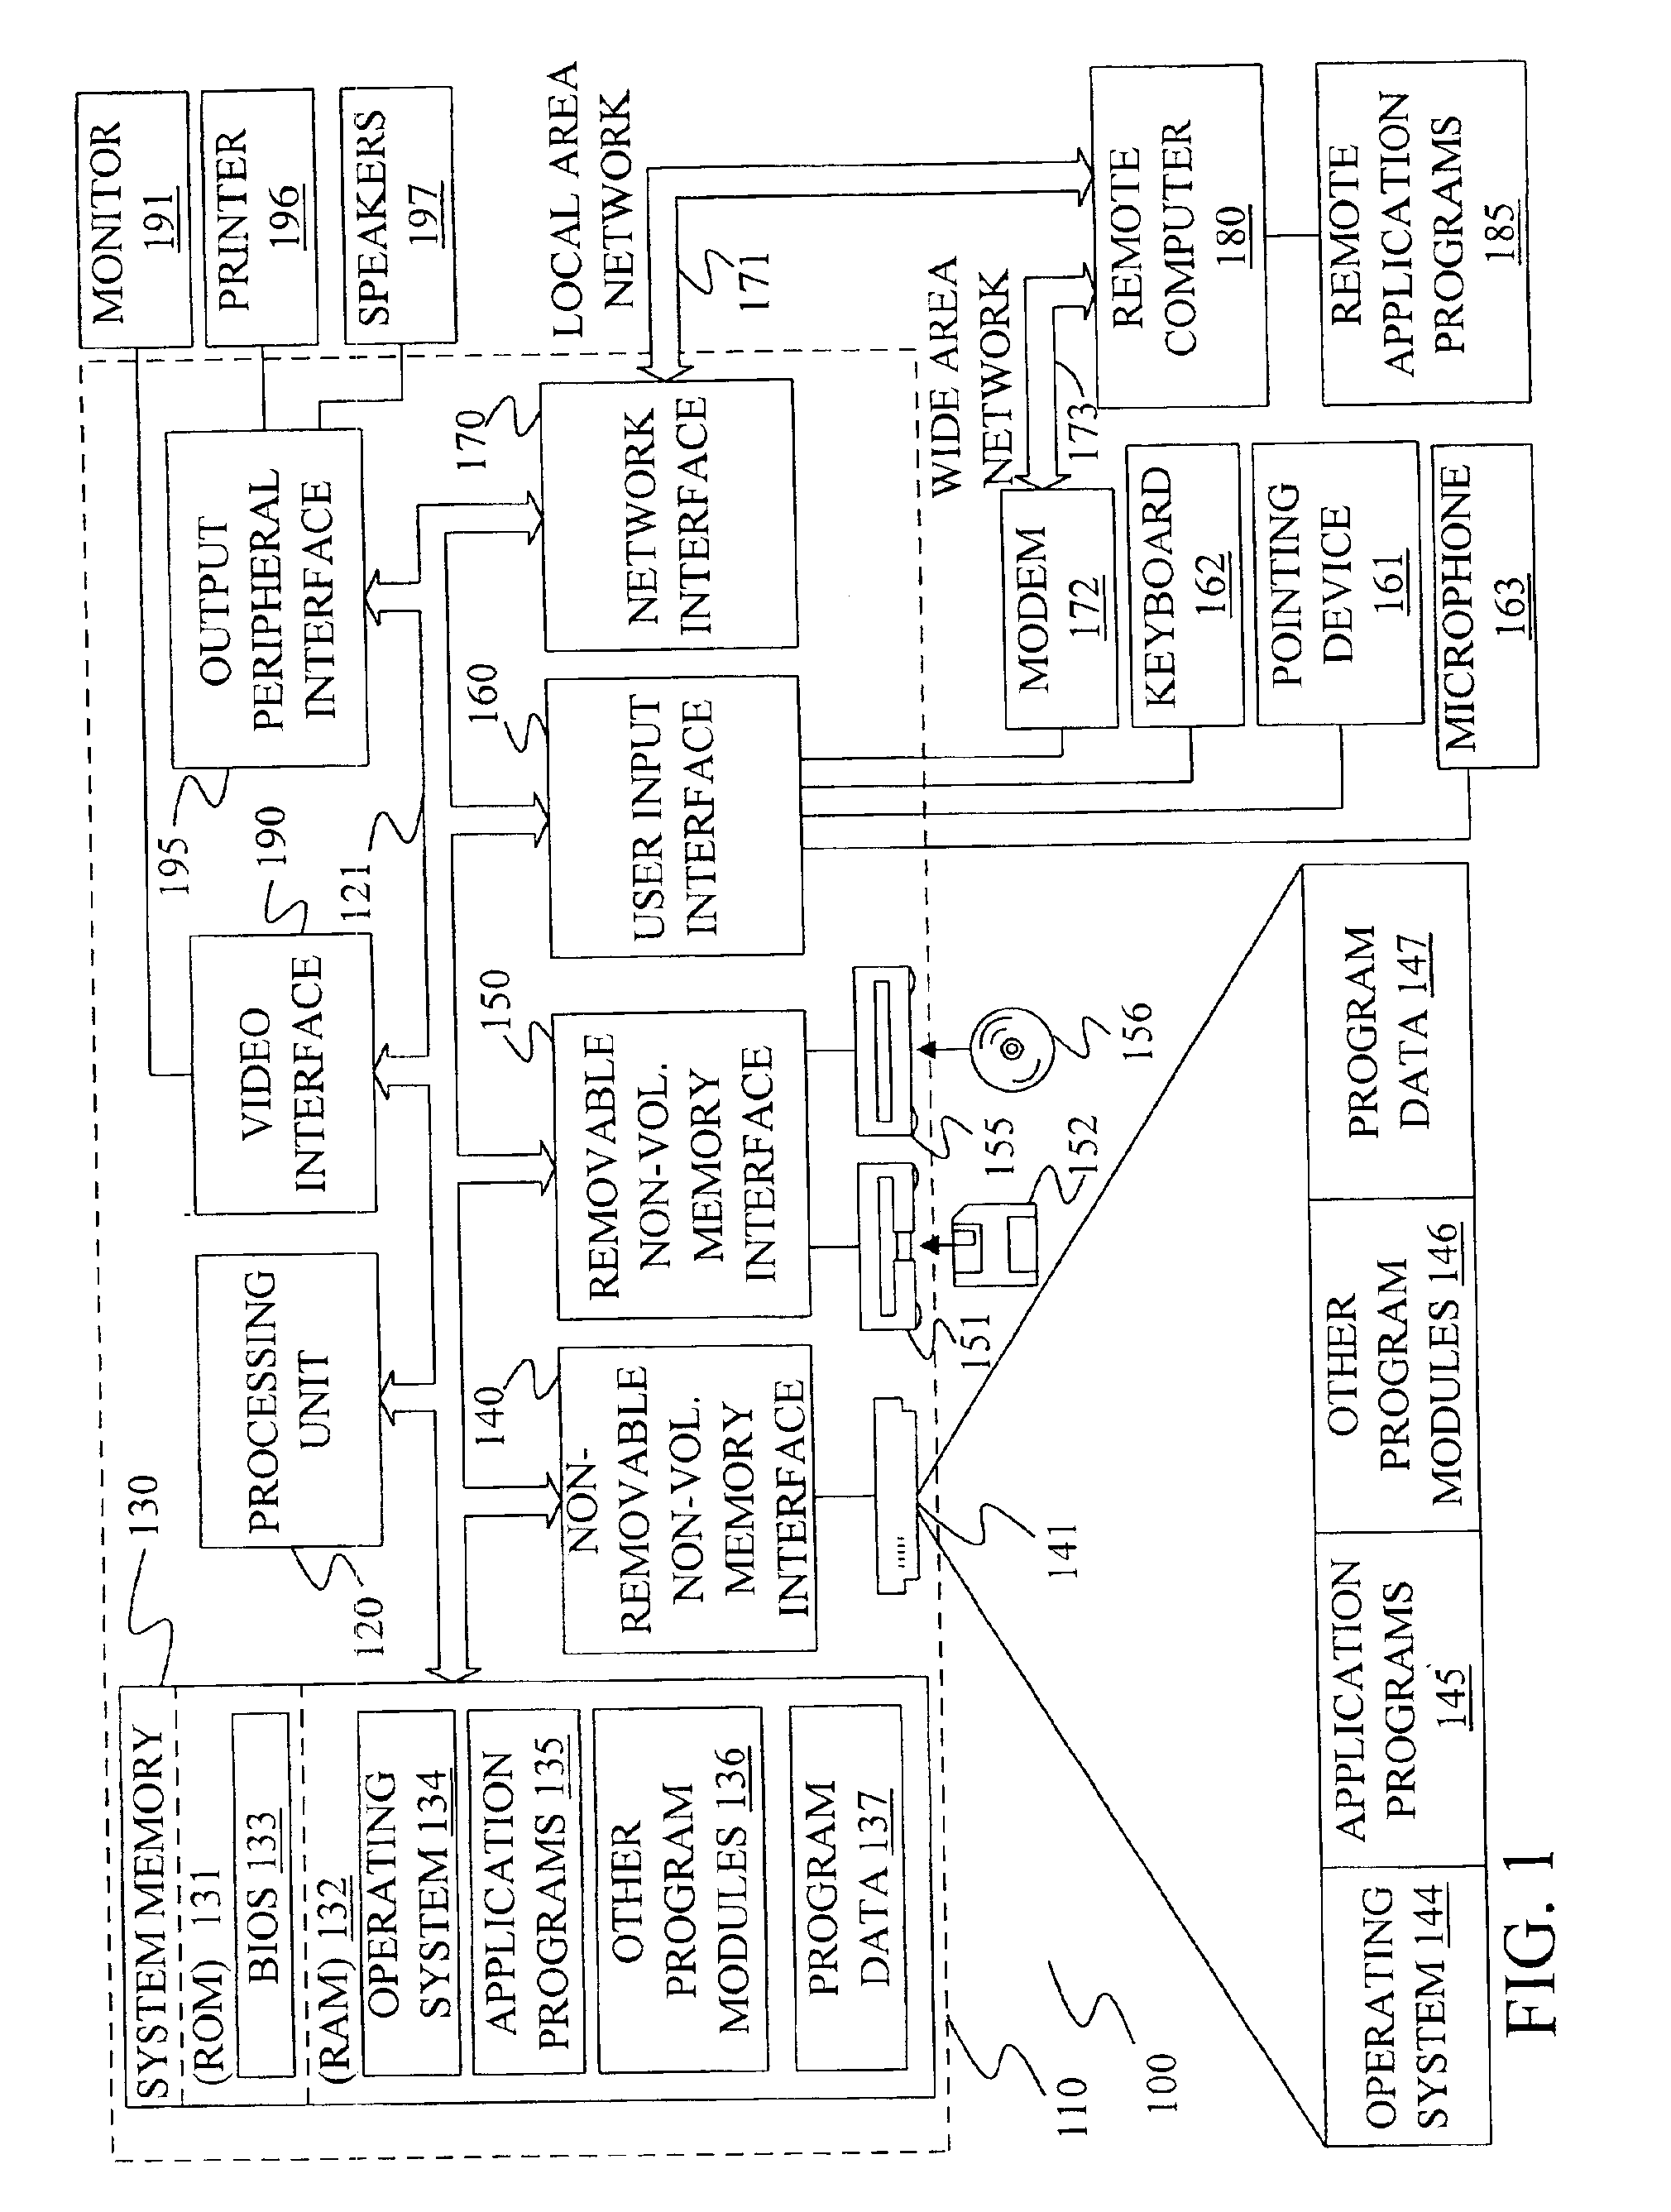 Method and apparatus for speech synthesis without prosody modification